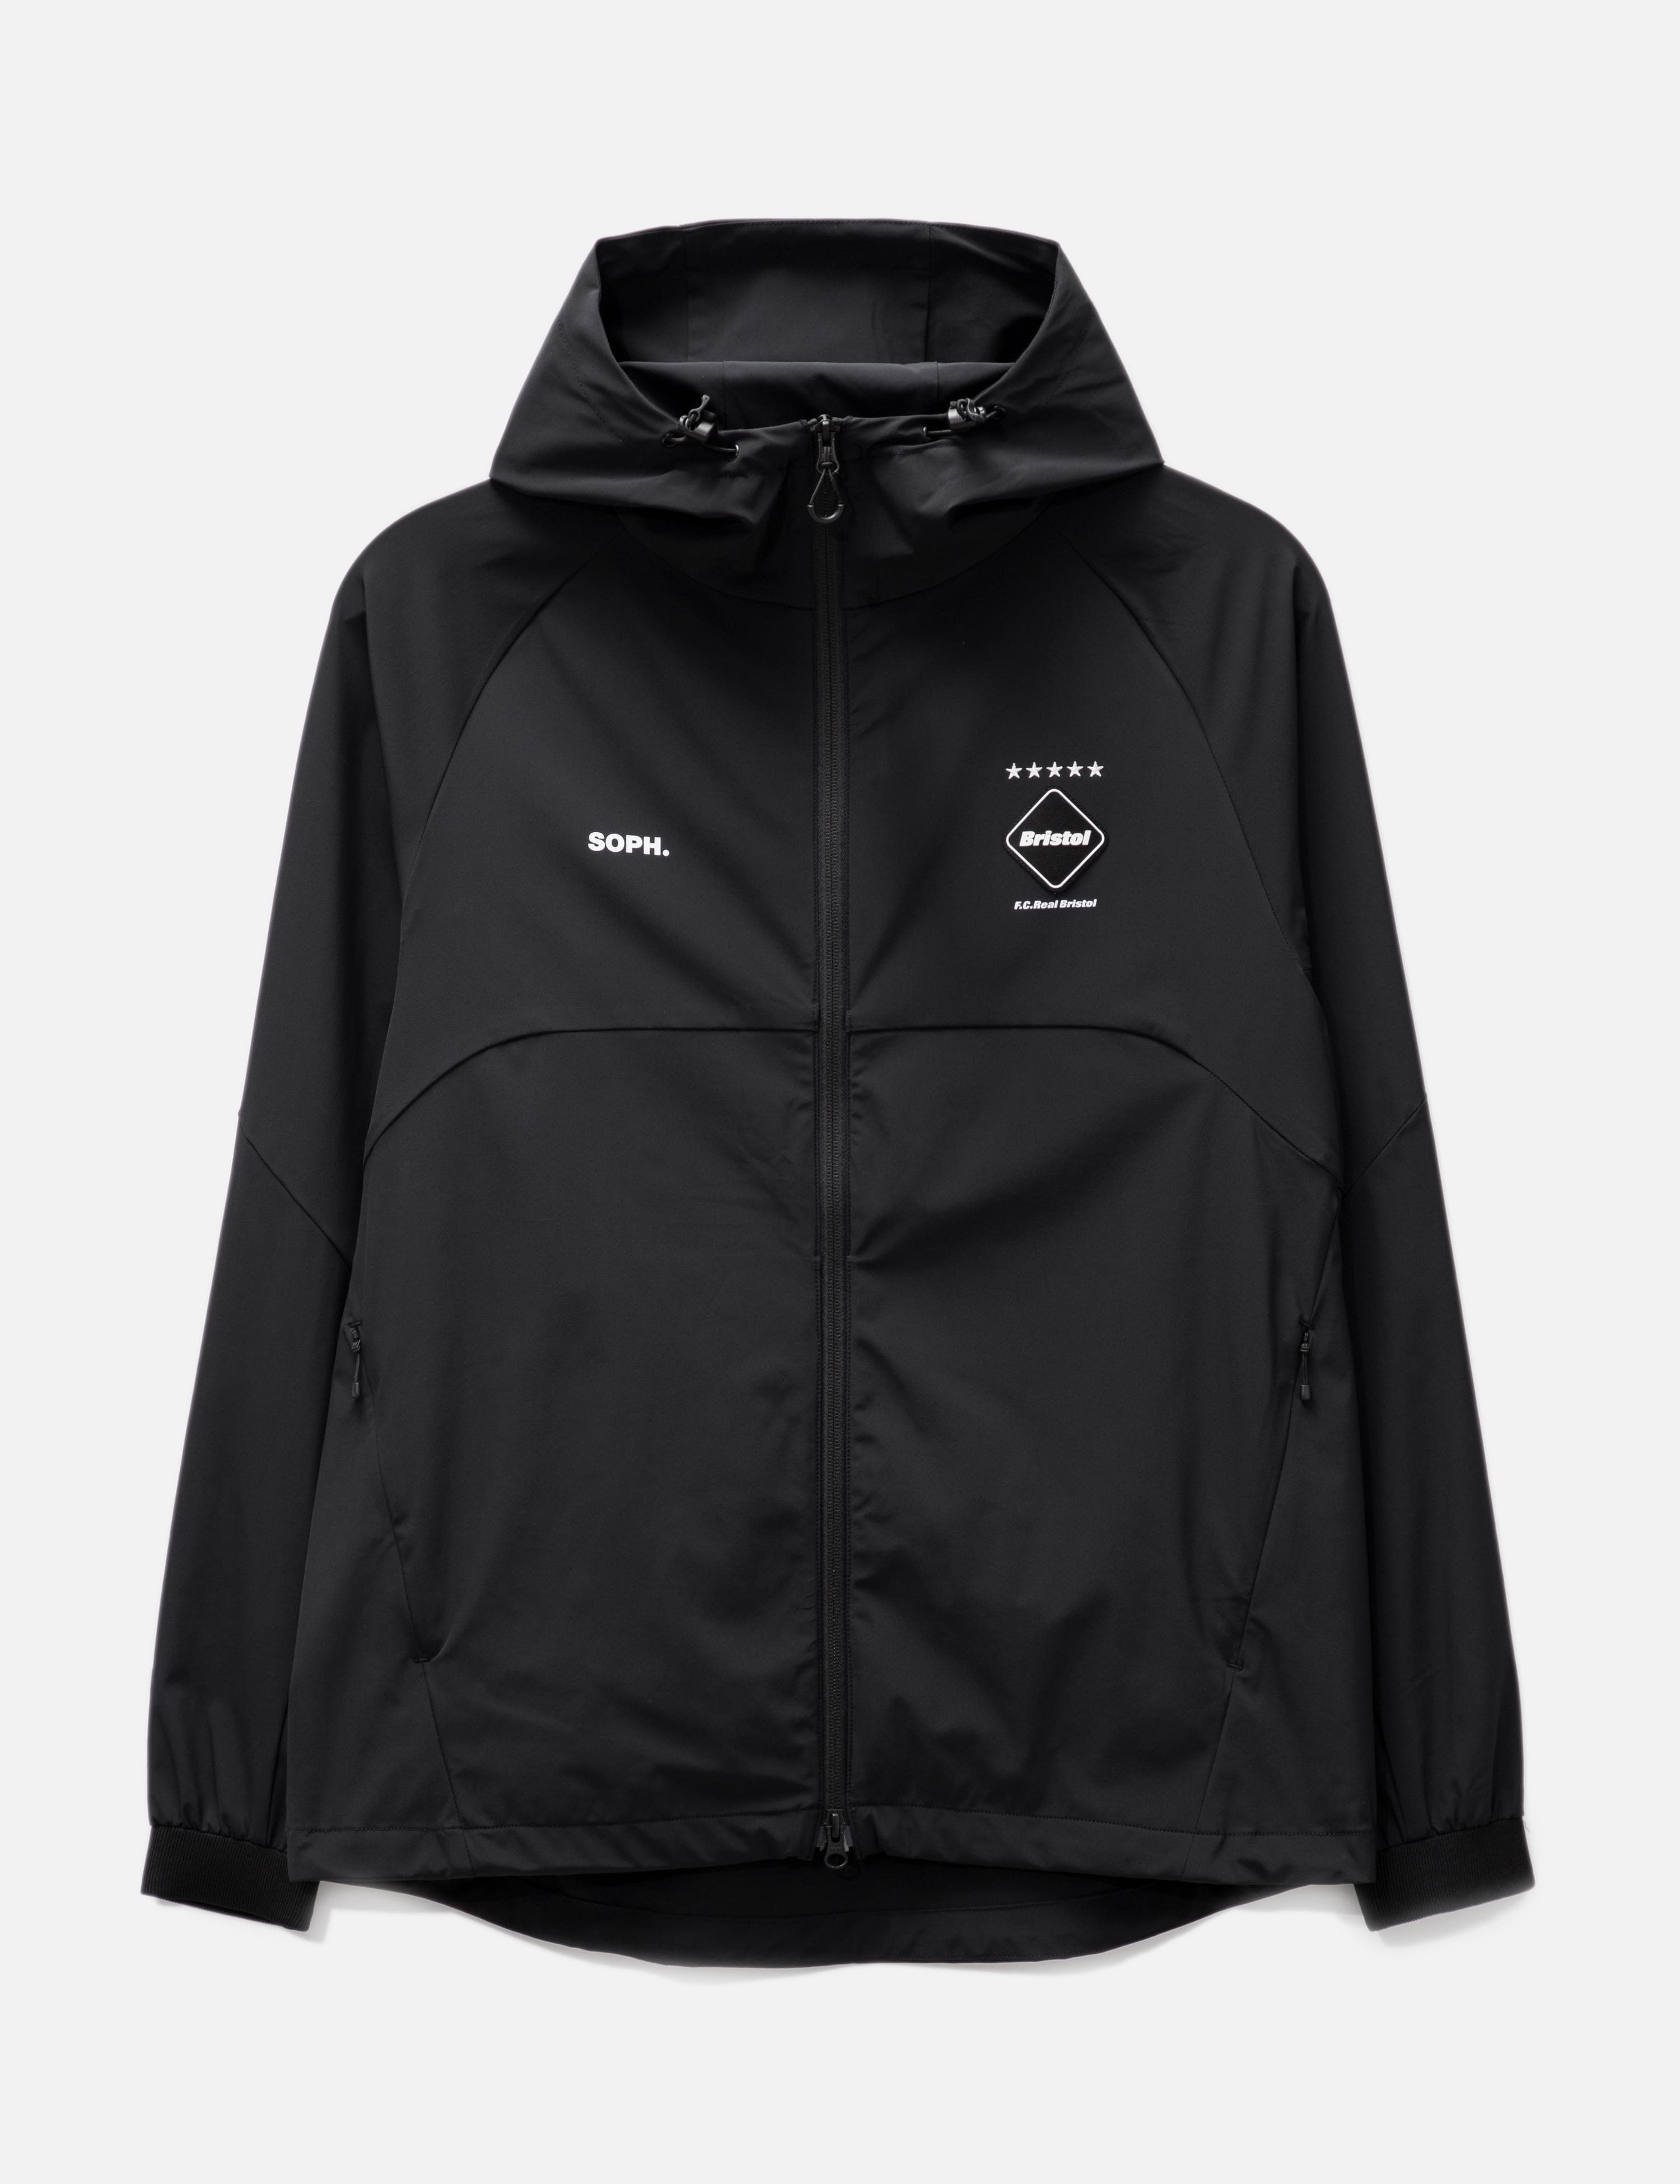 F.C. Real Bristol - 2 In 1 Tour Jacket | HBX - Globally Curated